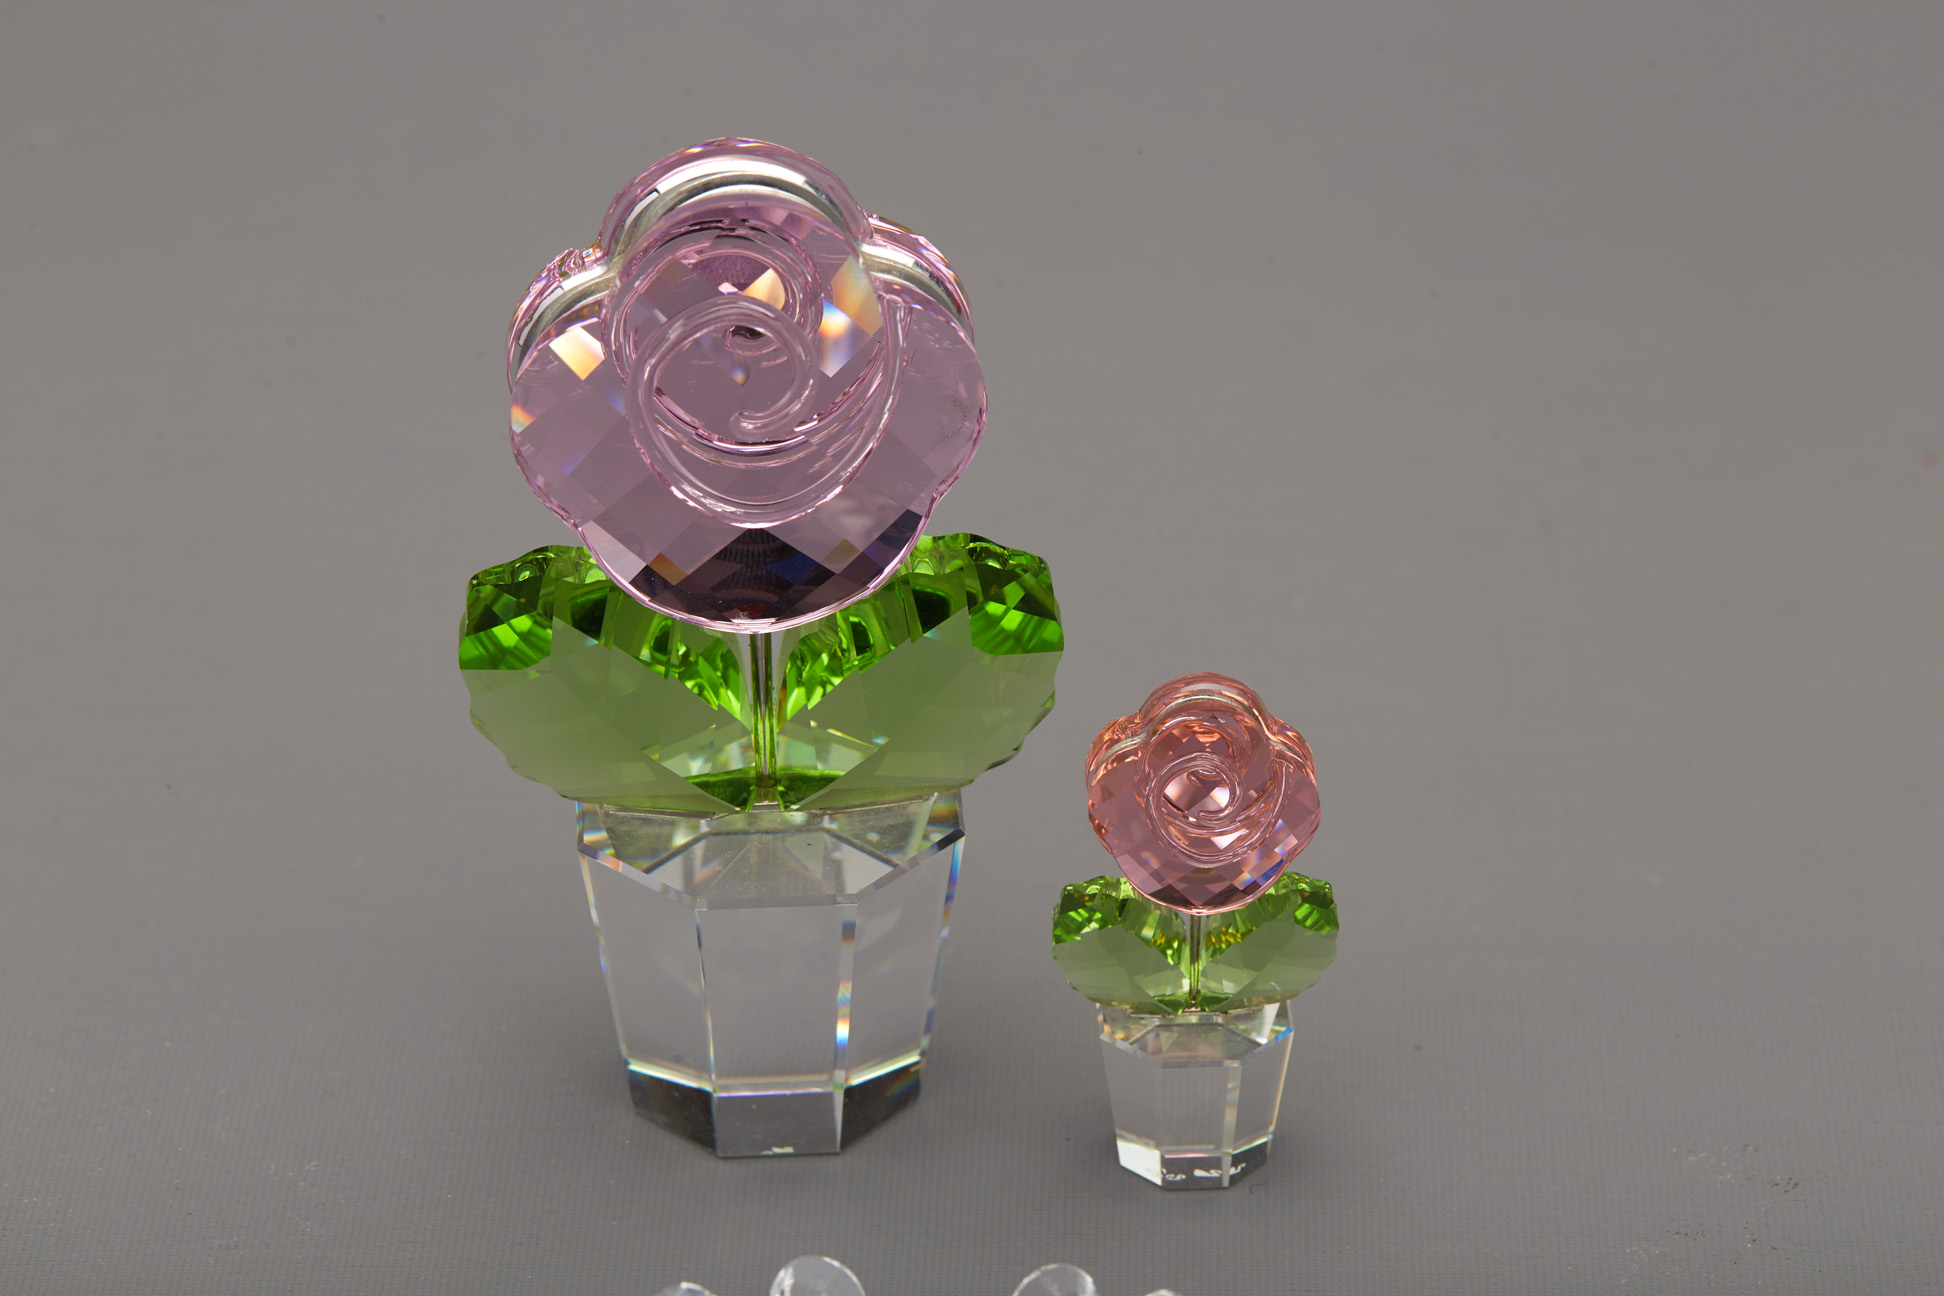 TWO SWAROVSKI CRYSTAL FLOWERS & TWO MICE - Image 2 of 6